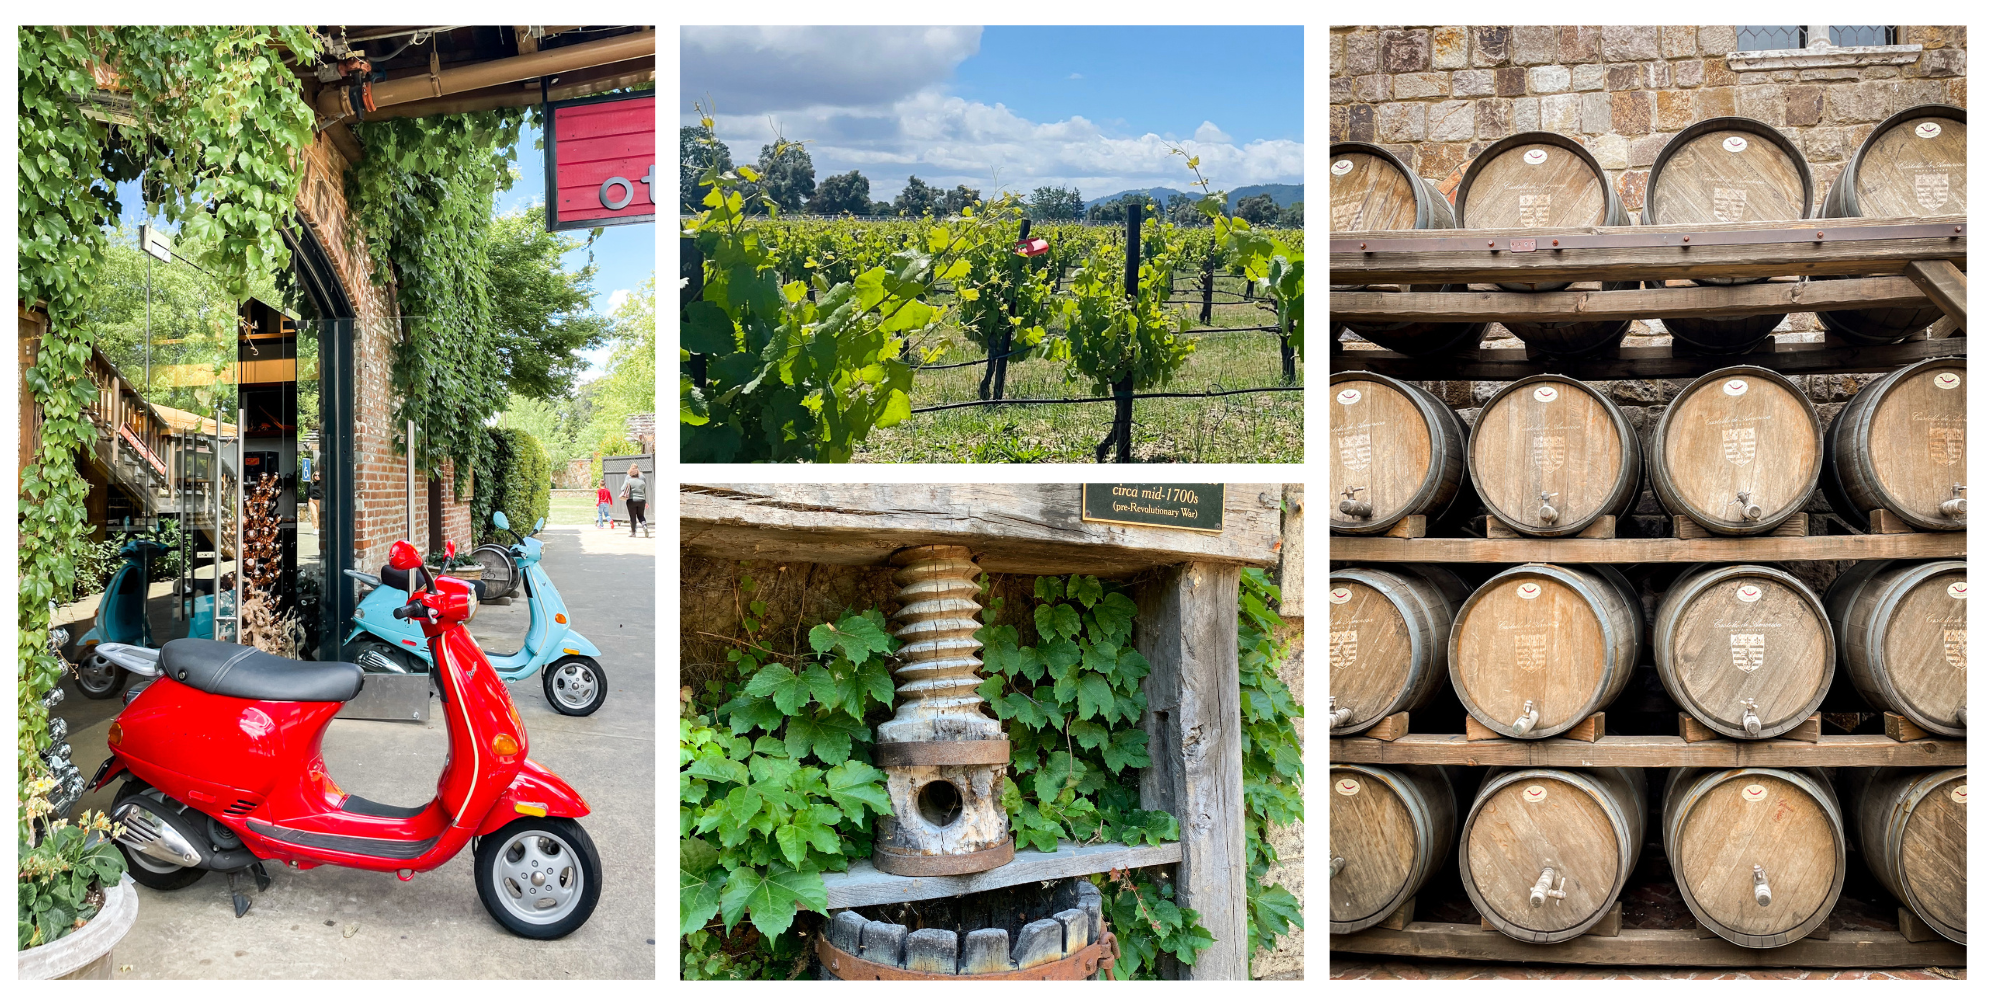 Moped, Wine Press and Wine Barrels in Napa Valley